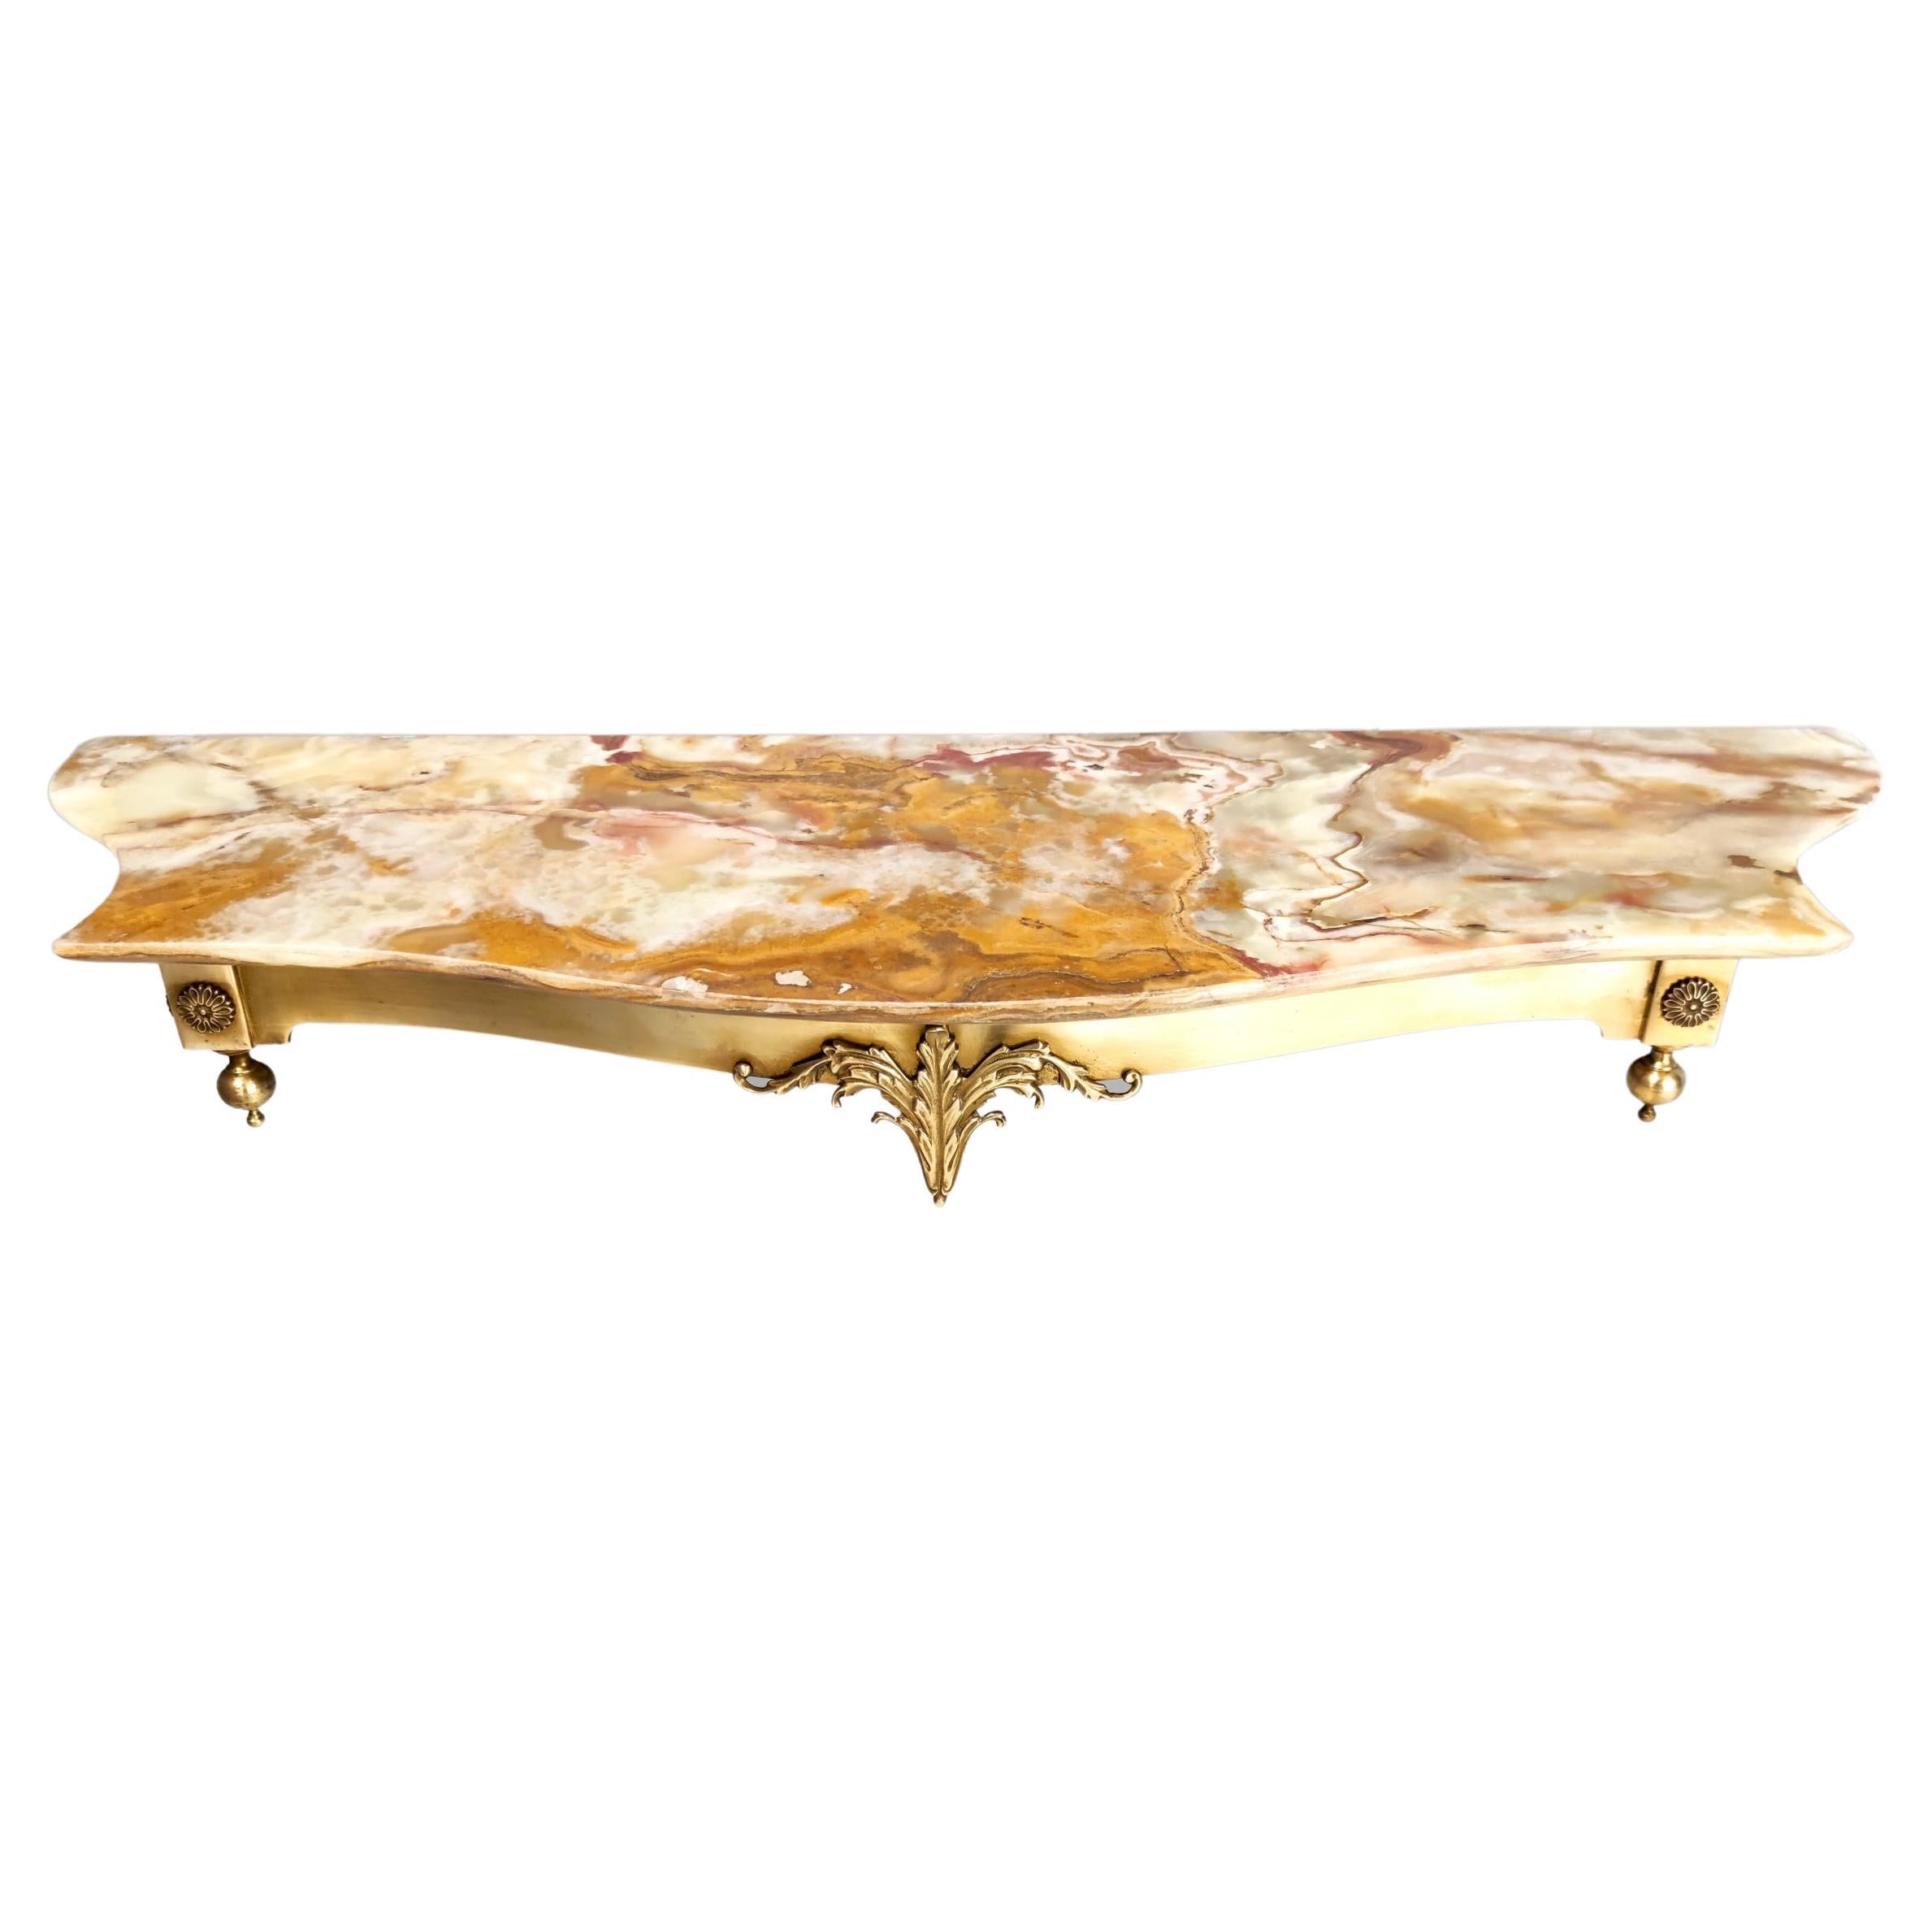 Vintage Wall-Mounted Brass Console Table with Yellow Onyx Top, Italy